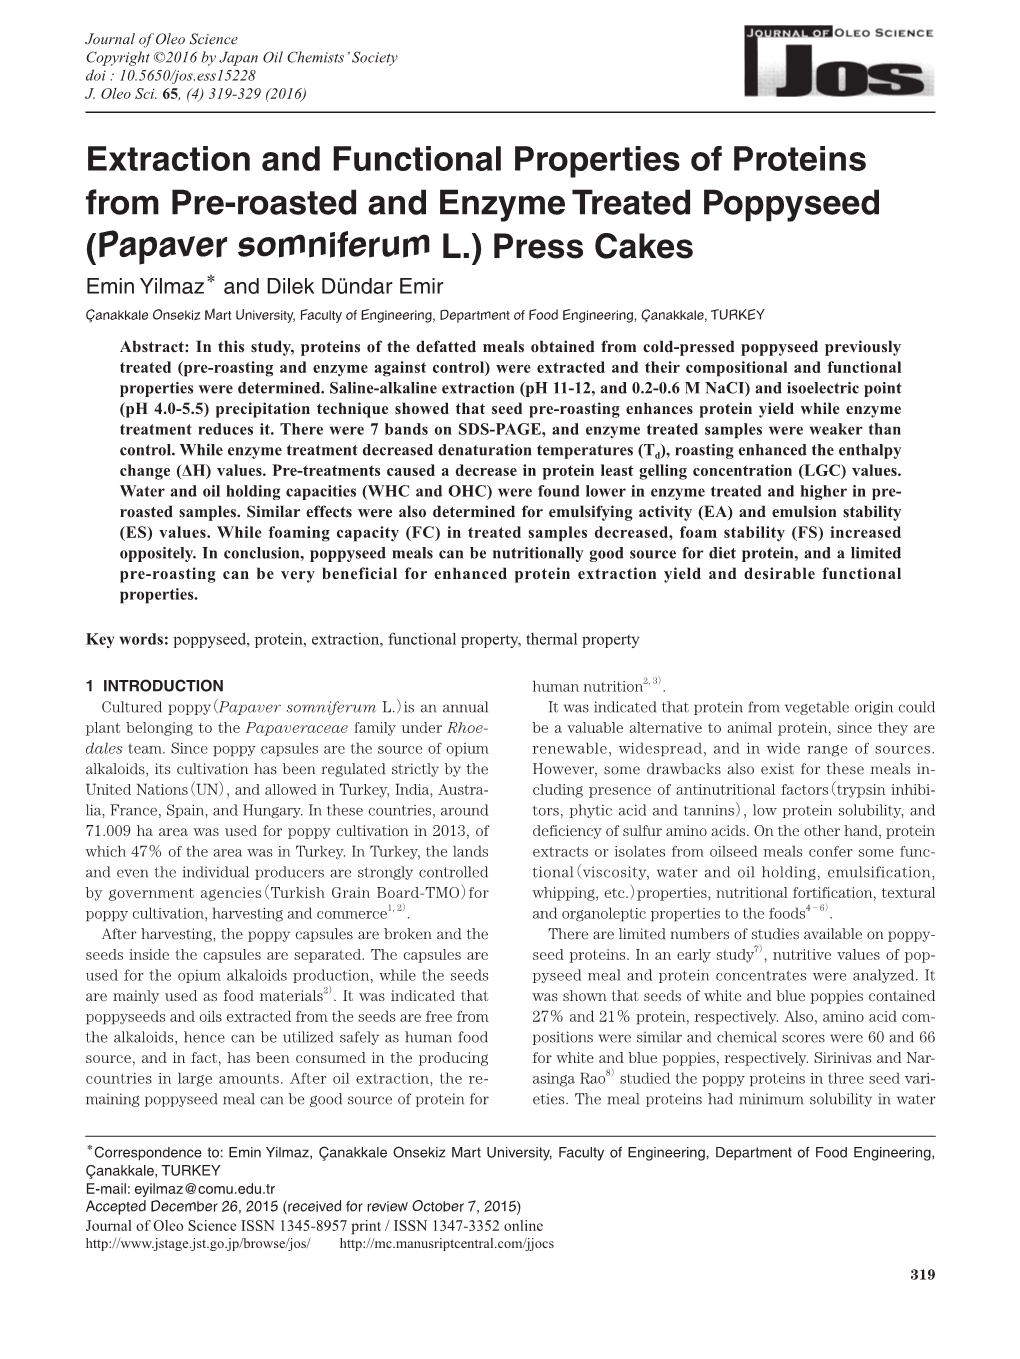 Extraction and Functional Properties of Proteins from Pre-Roasted And